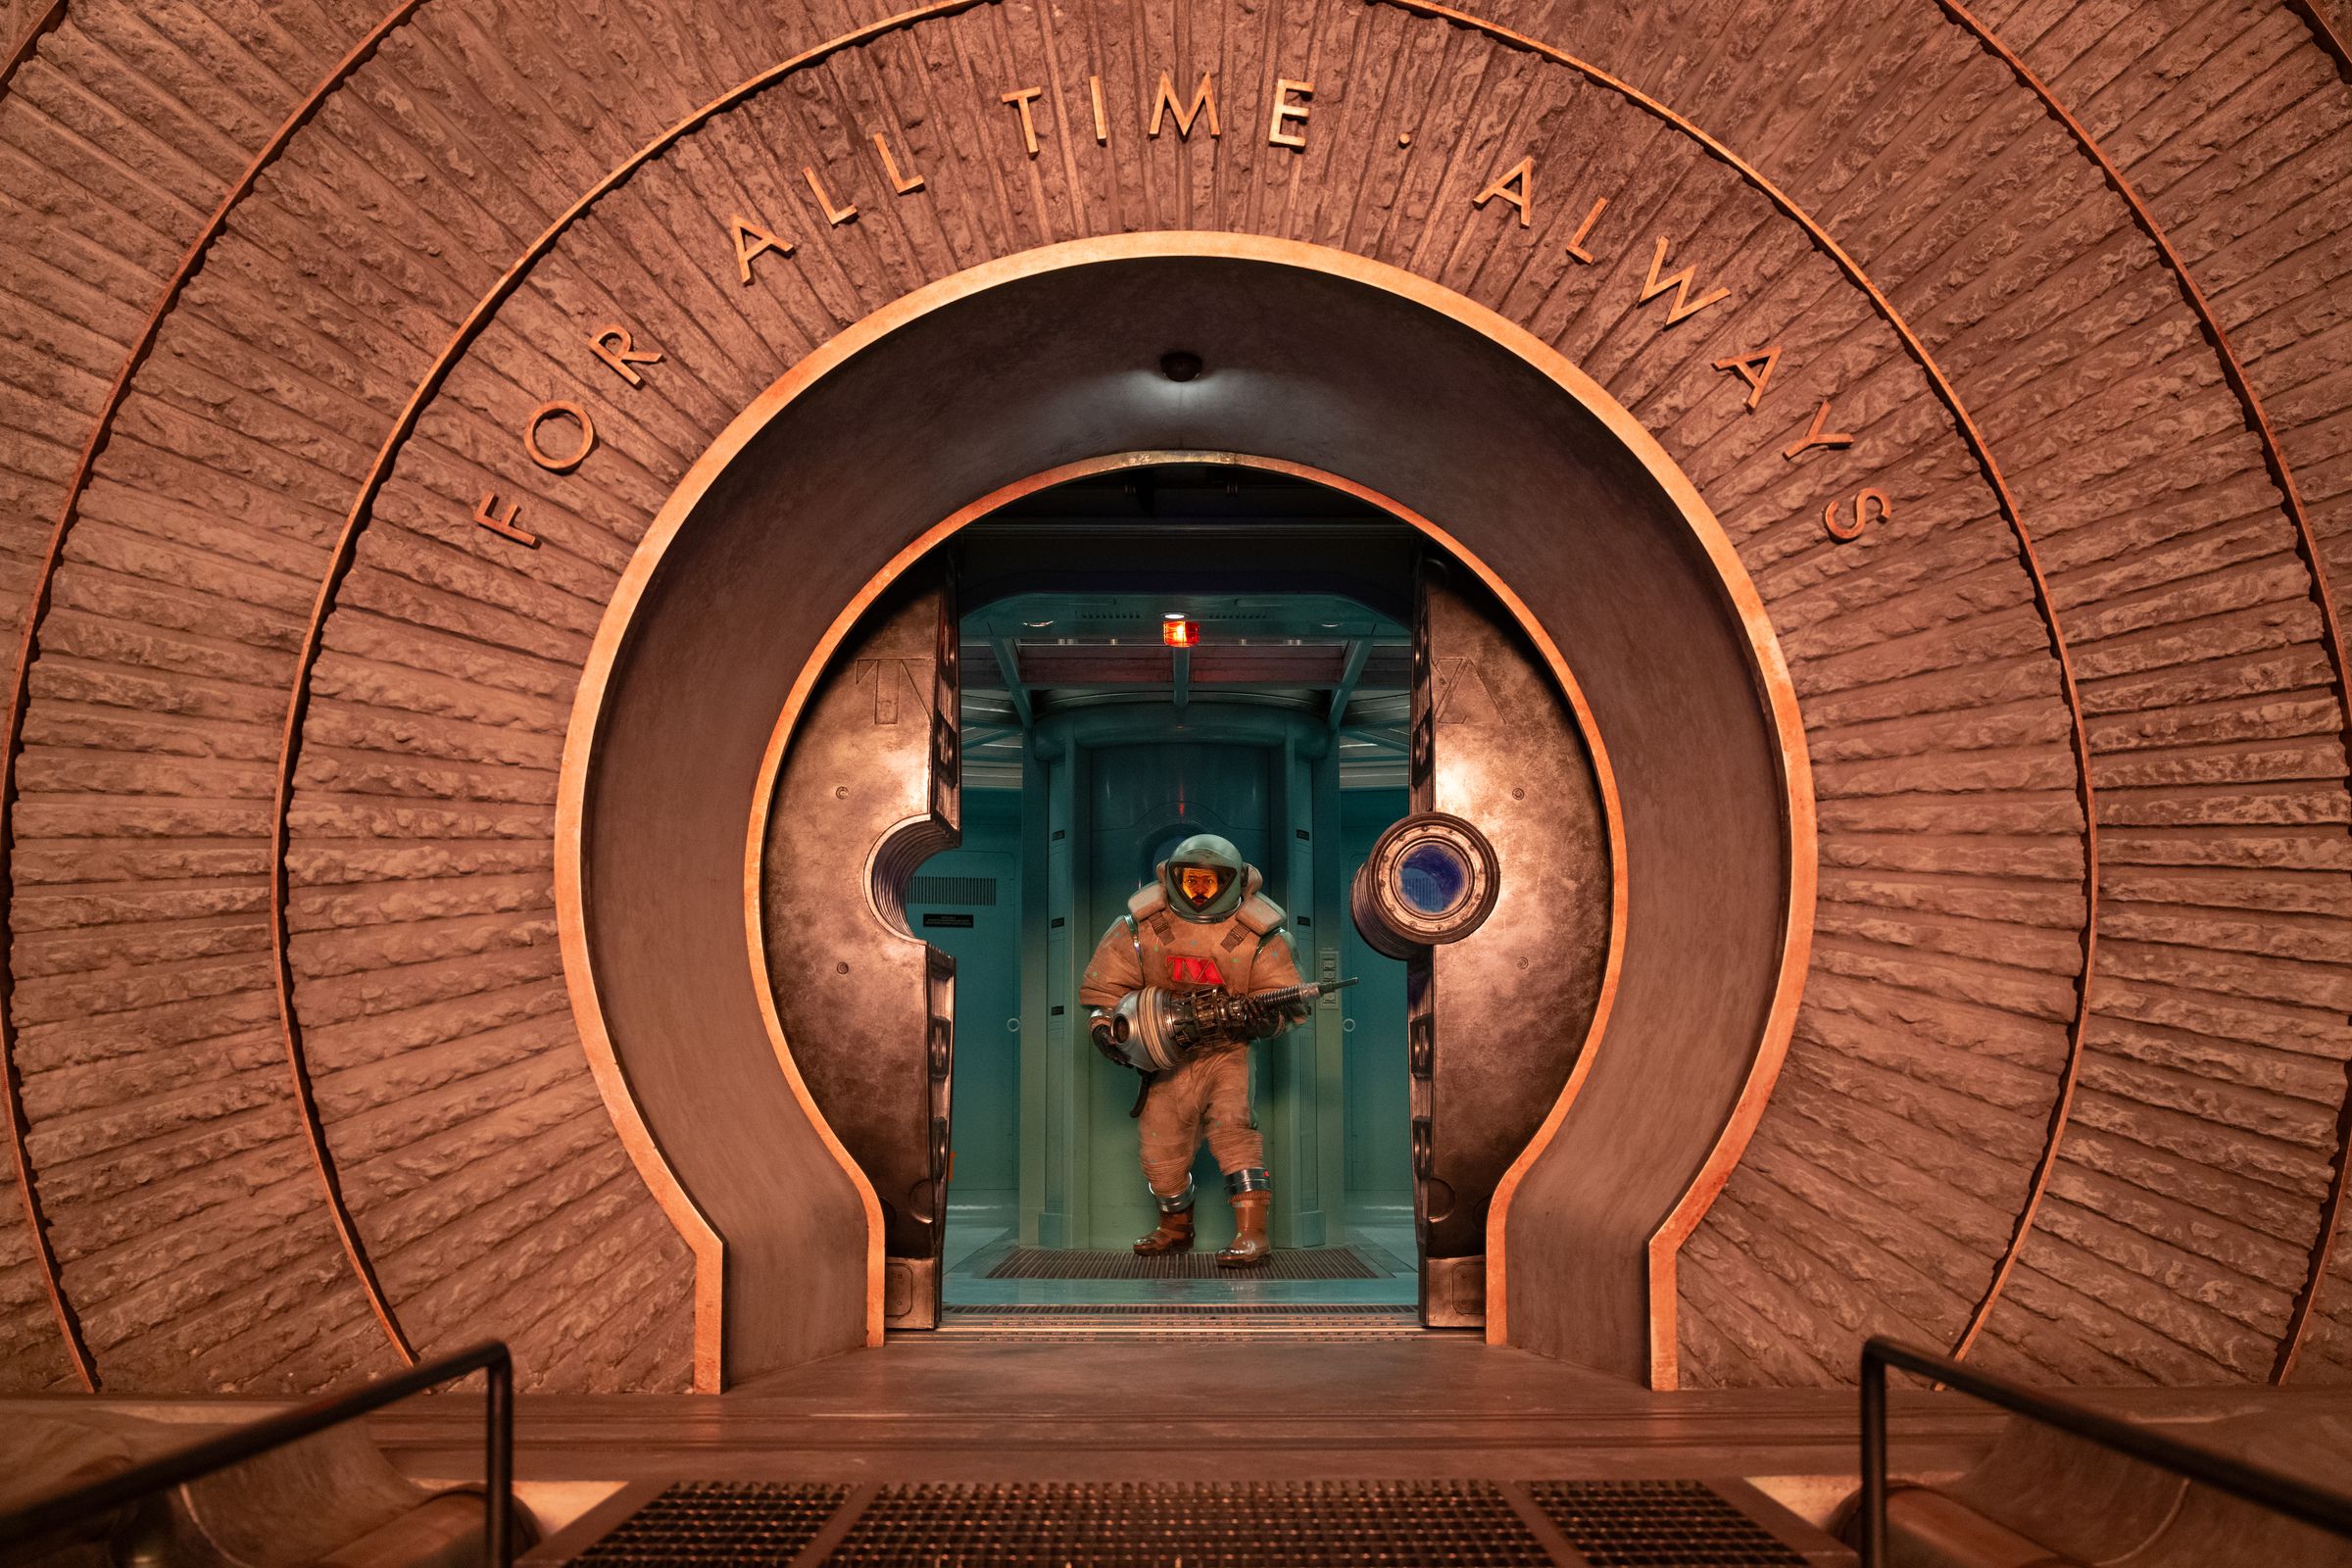 A man in a spacesuit holding a device that looks like a massive screw in both hands. The man is standing in the circular doorway opening onto a platform with a grated gangway. Above the door the words “for all time. Always” are inscribed.